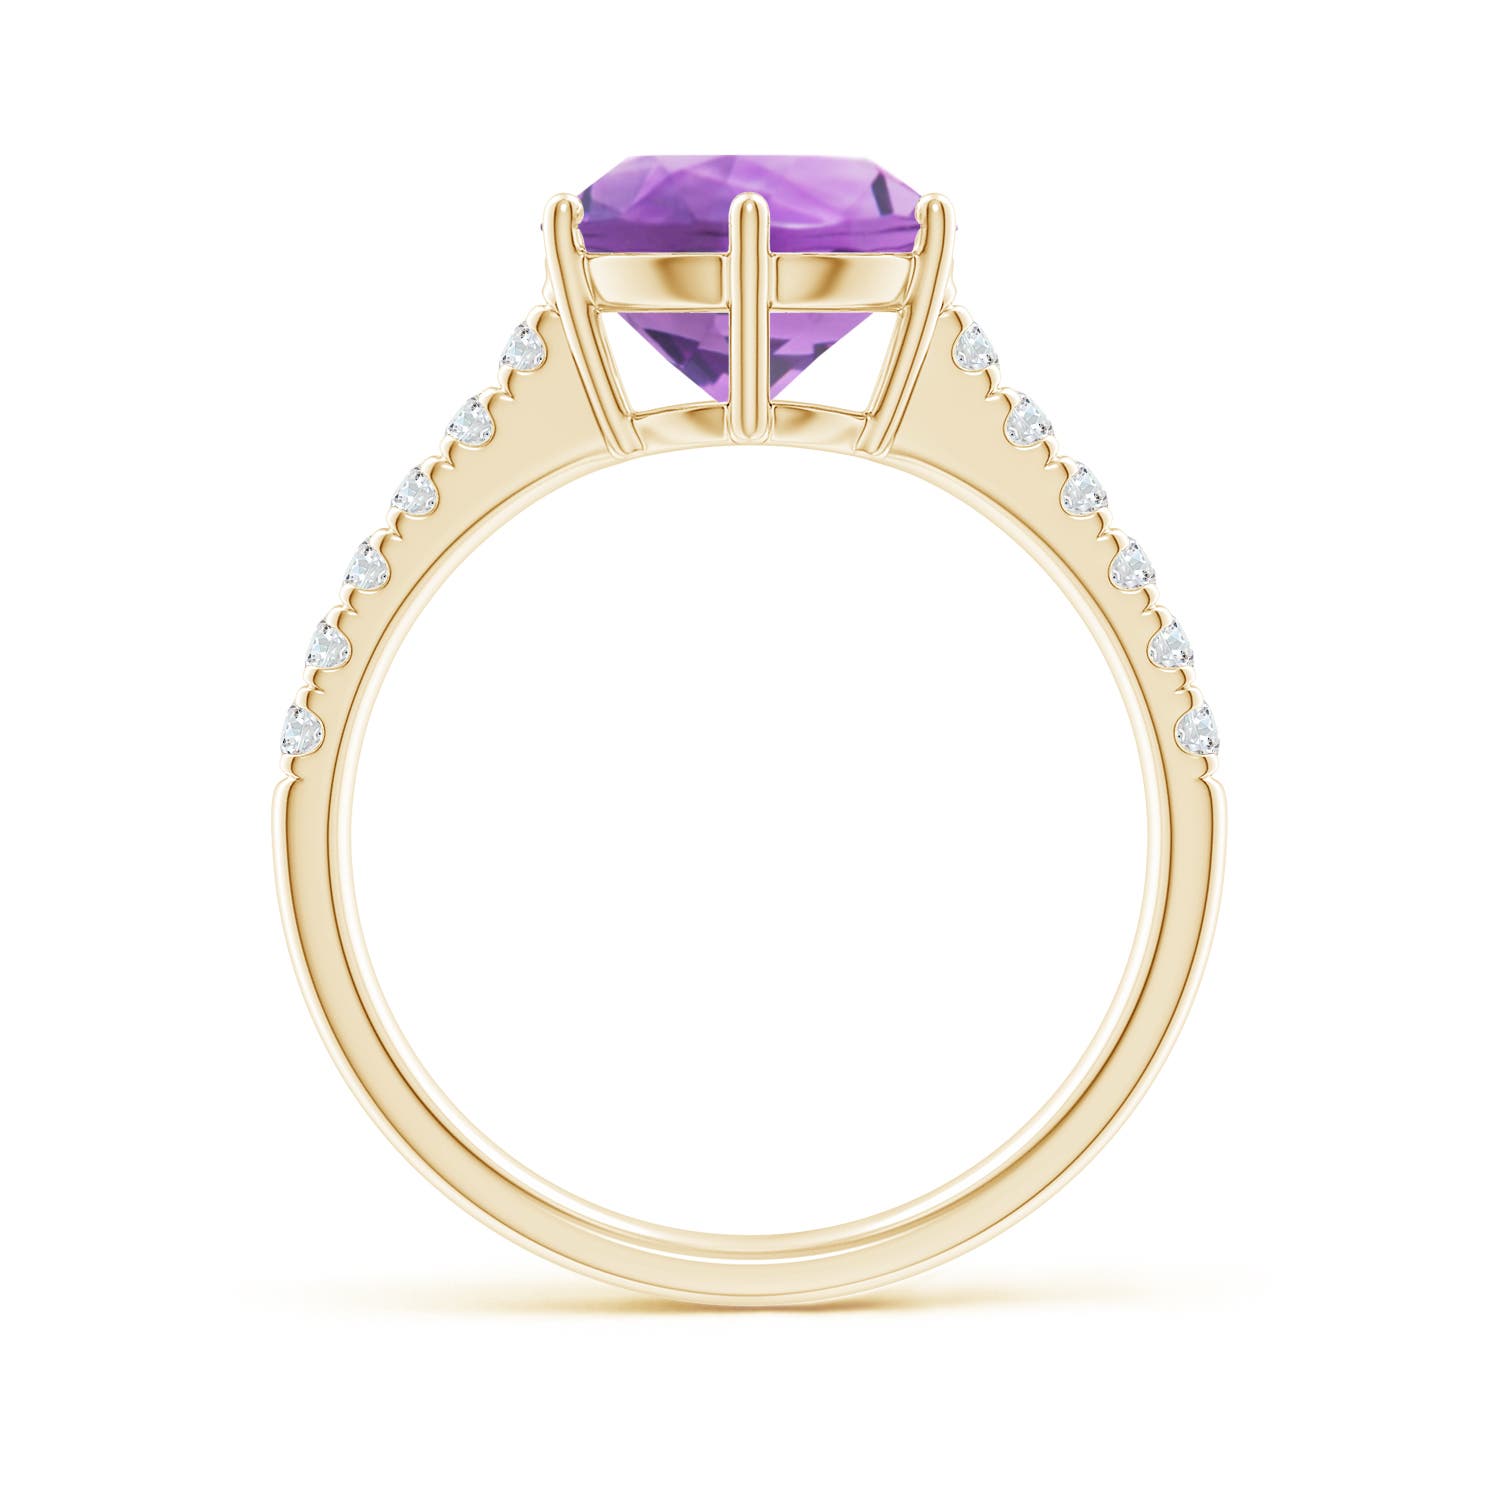 A - Amethyst / 2.75 CT / 14 KT Yellow Gold